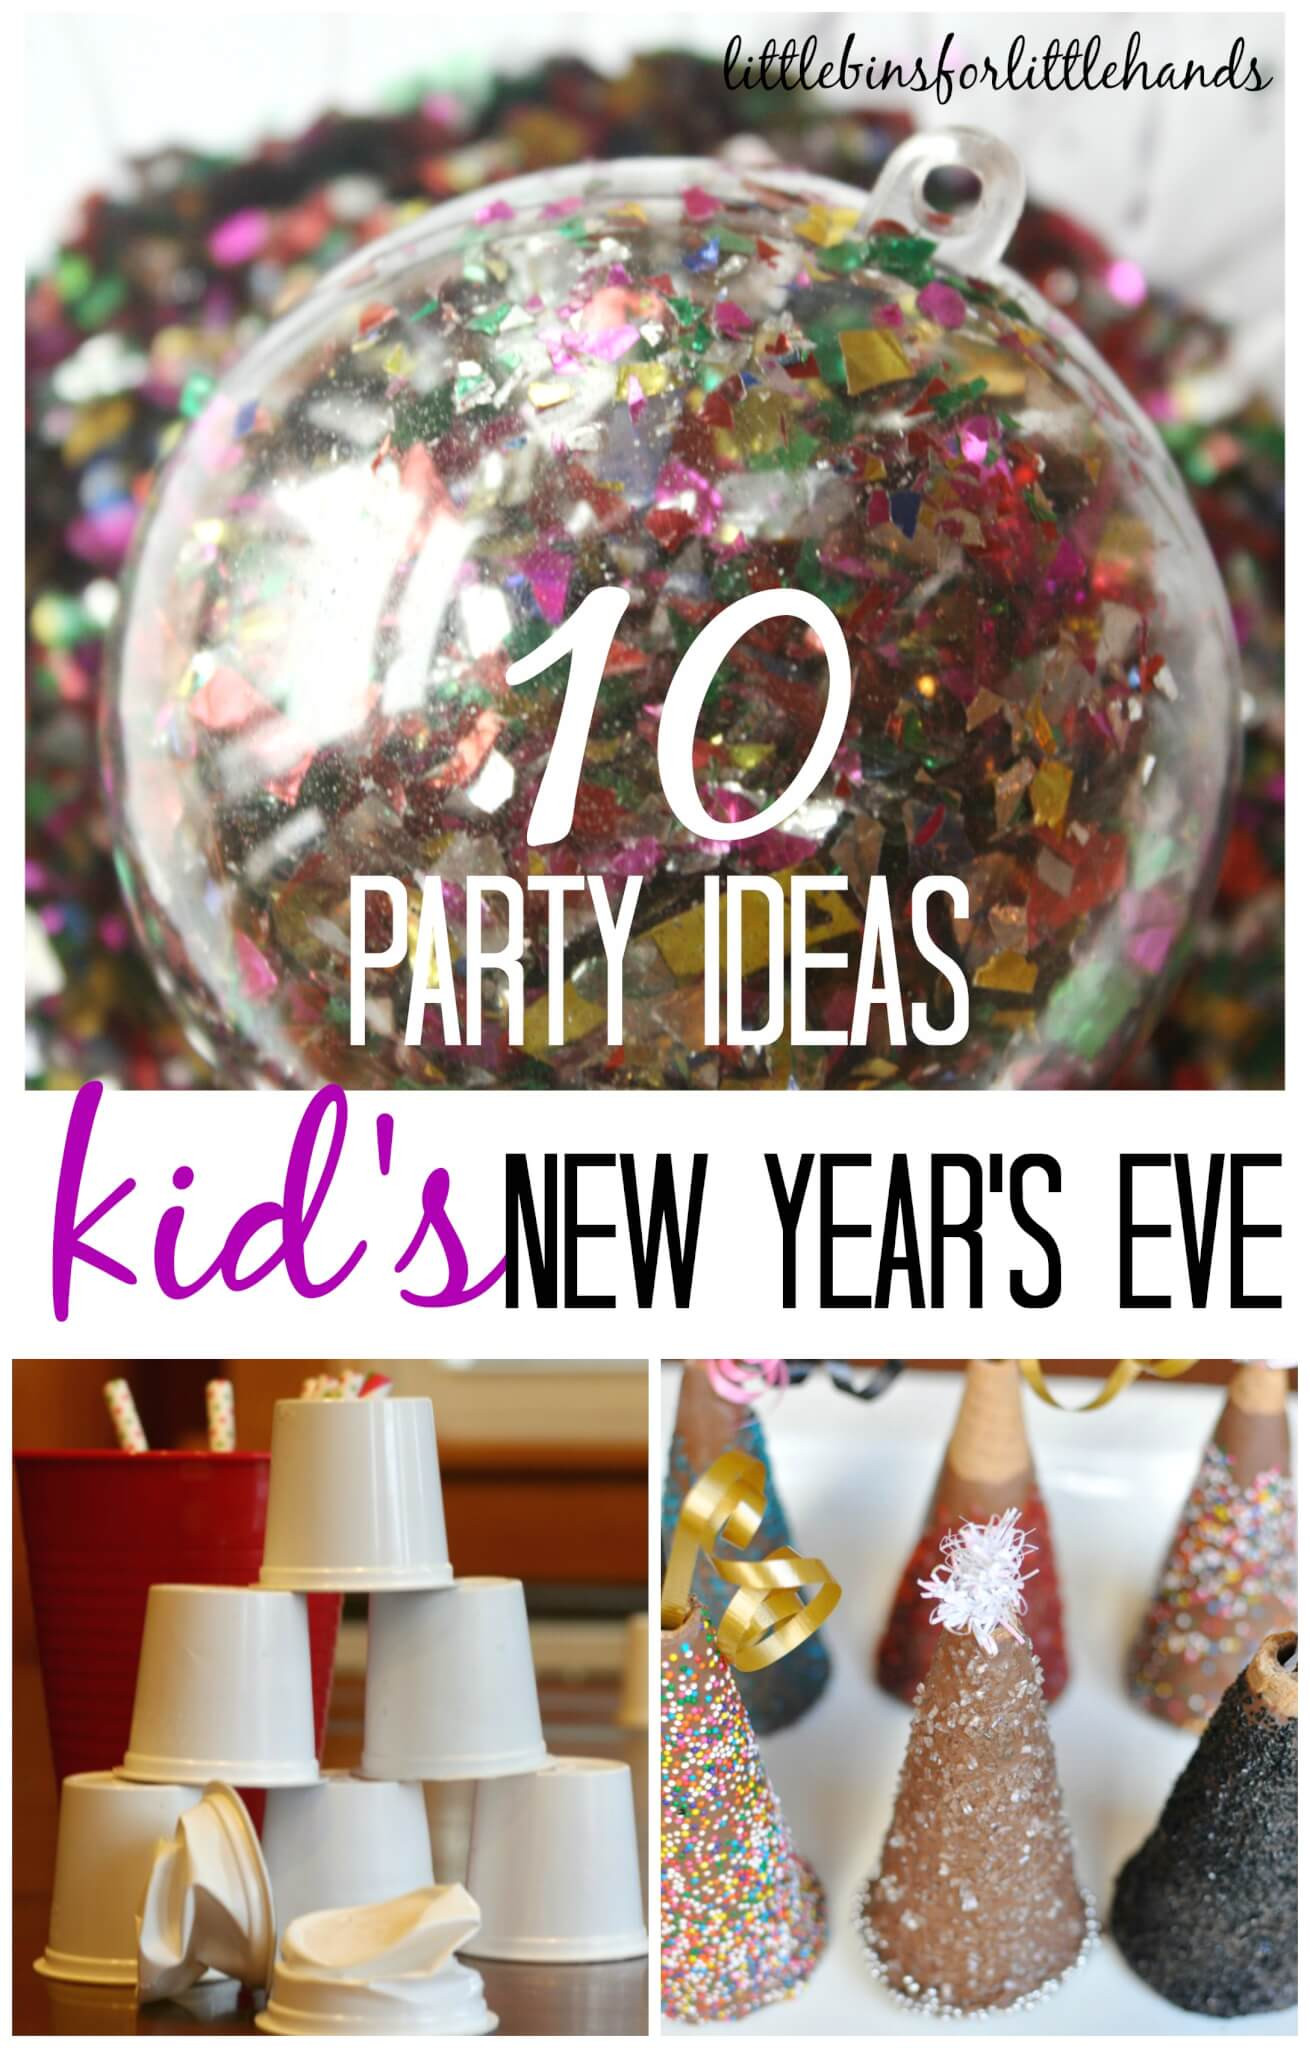 Kids New Year Eve Party Ideas
 Kids New Years Eve Party Ideas and Activities for New Years